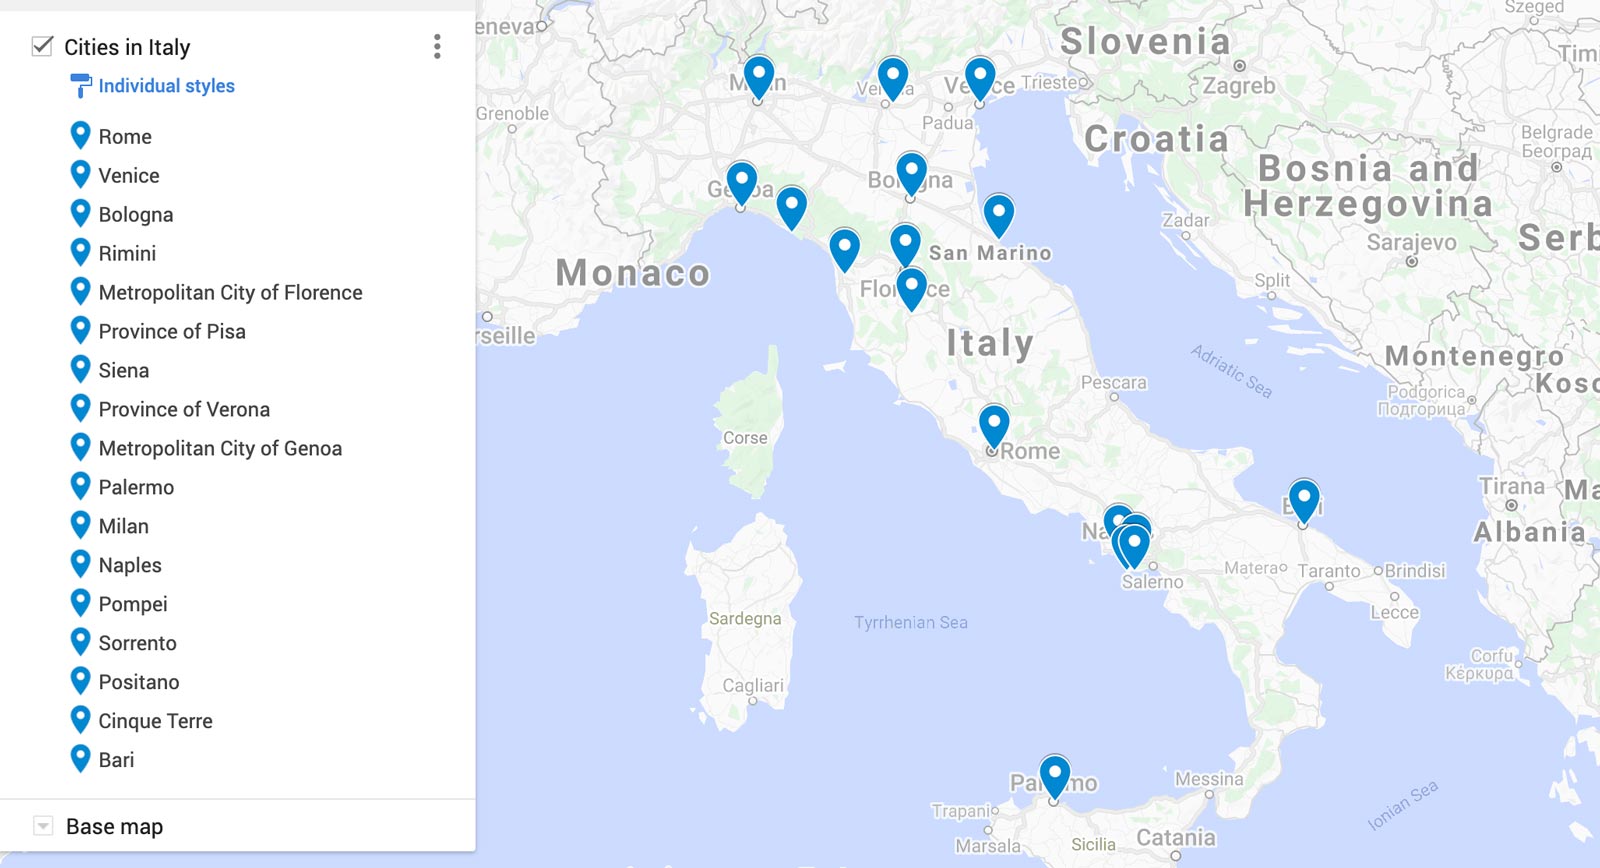 Map of Cities in Italy